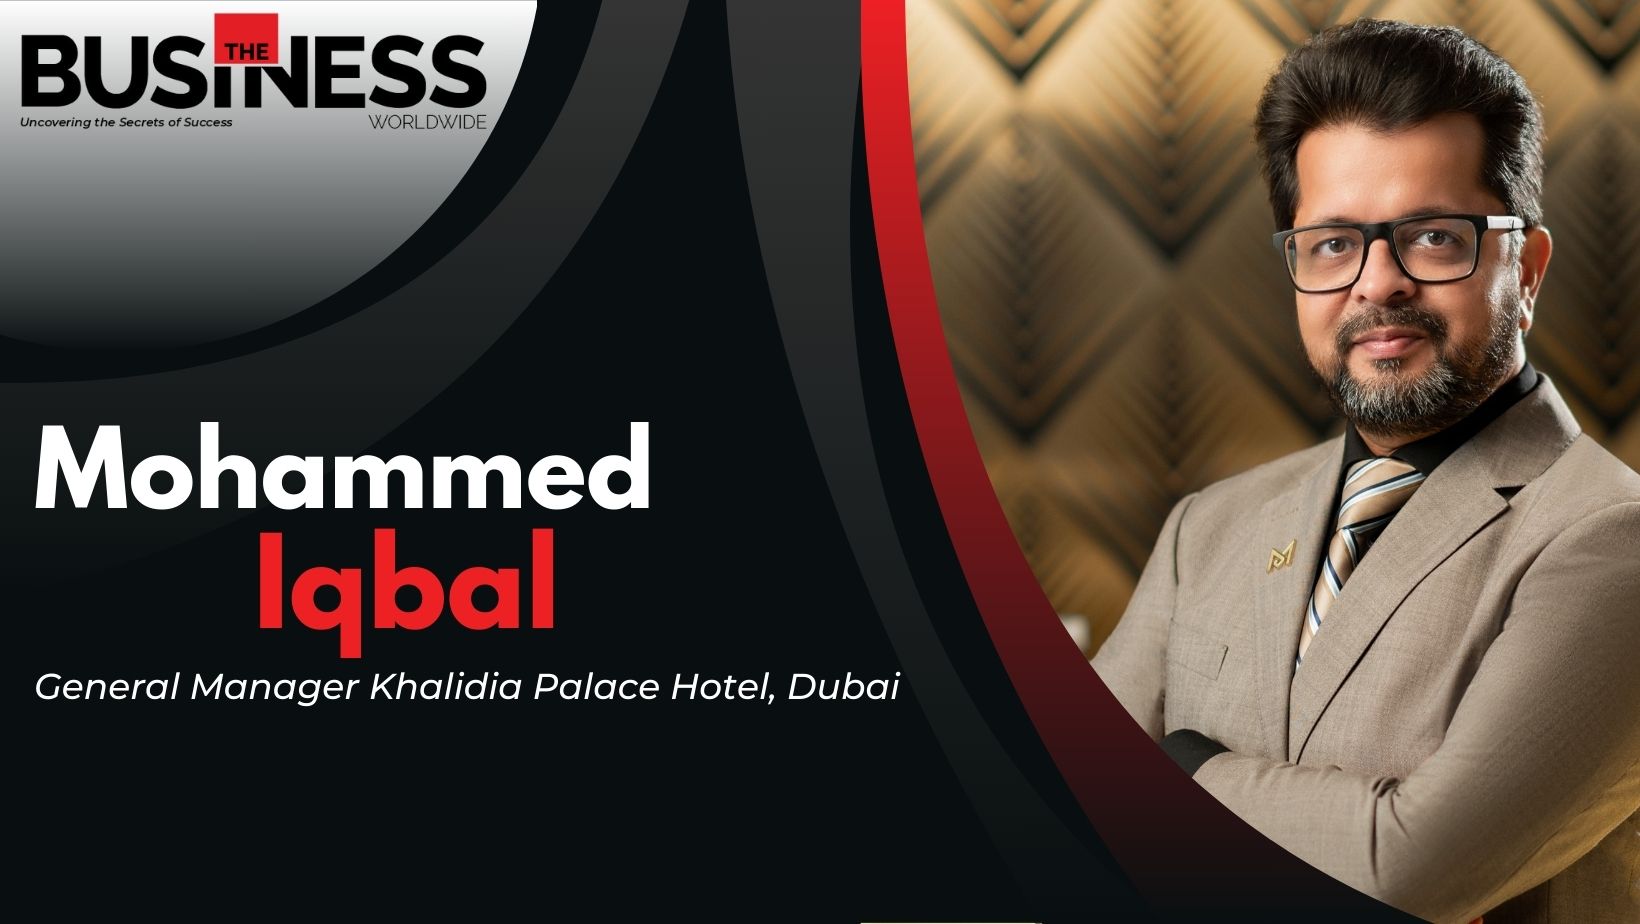 Mohammed Iqbal: A Passionate Hospitality Veteran Striving to Offer Elevated and Authentic Guest Experience